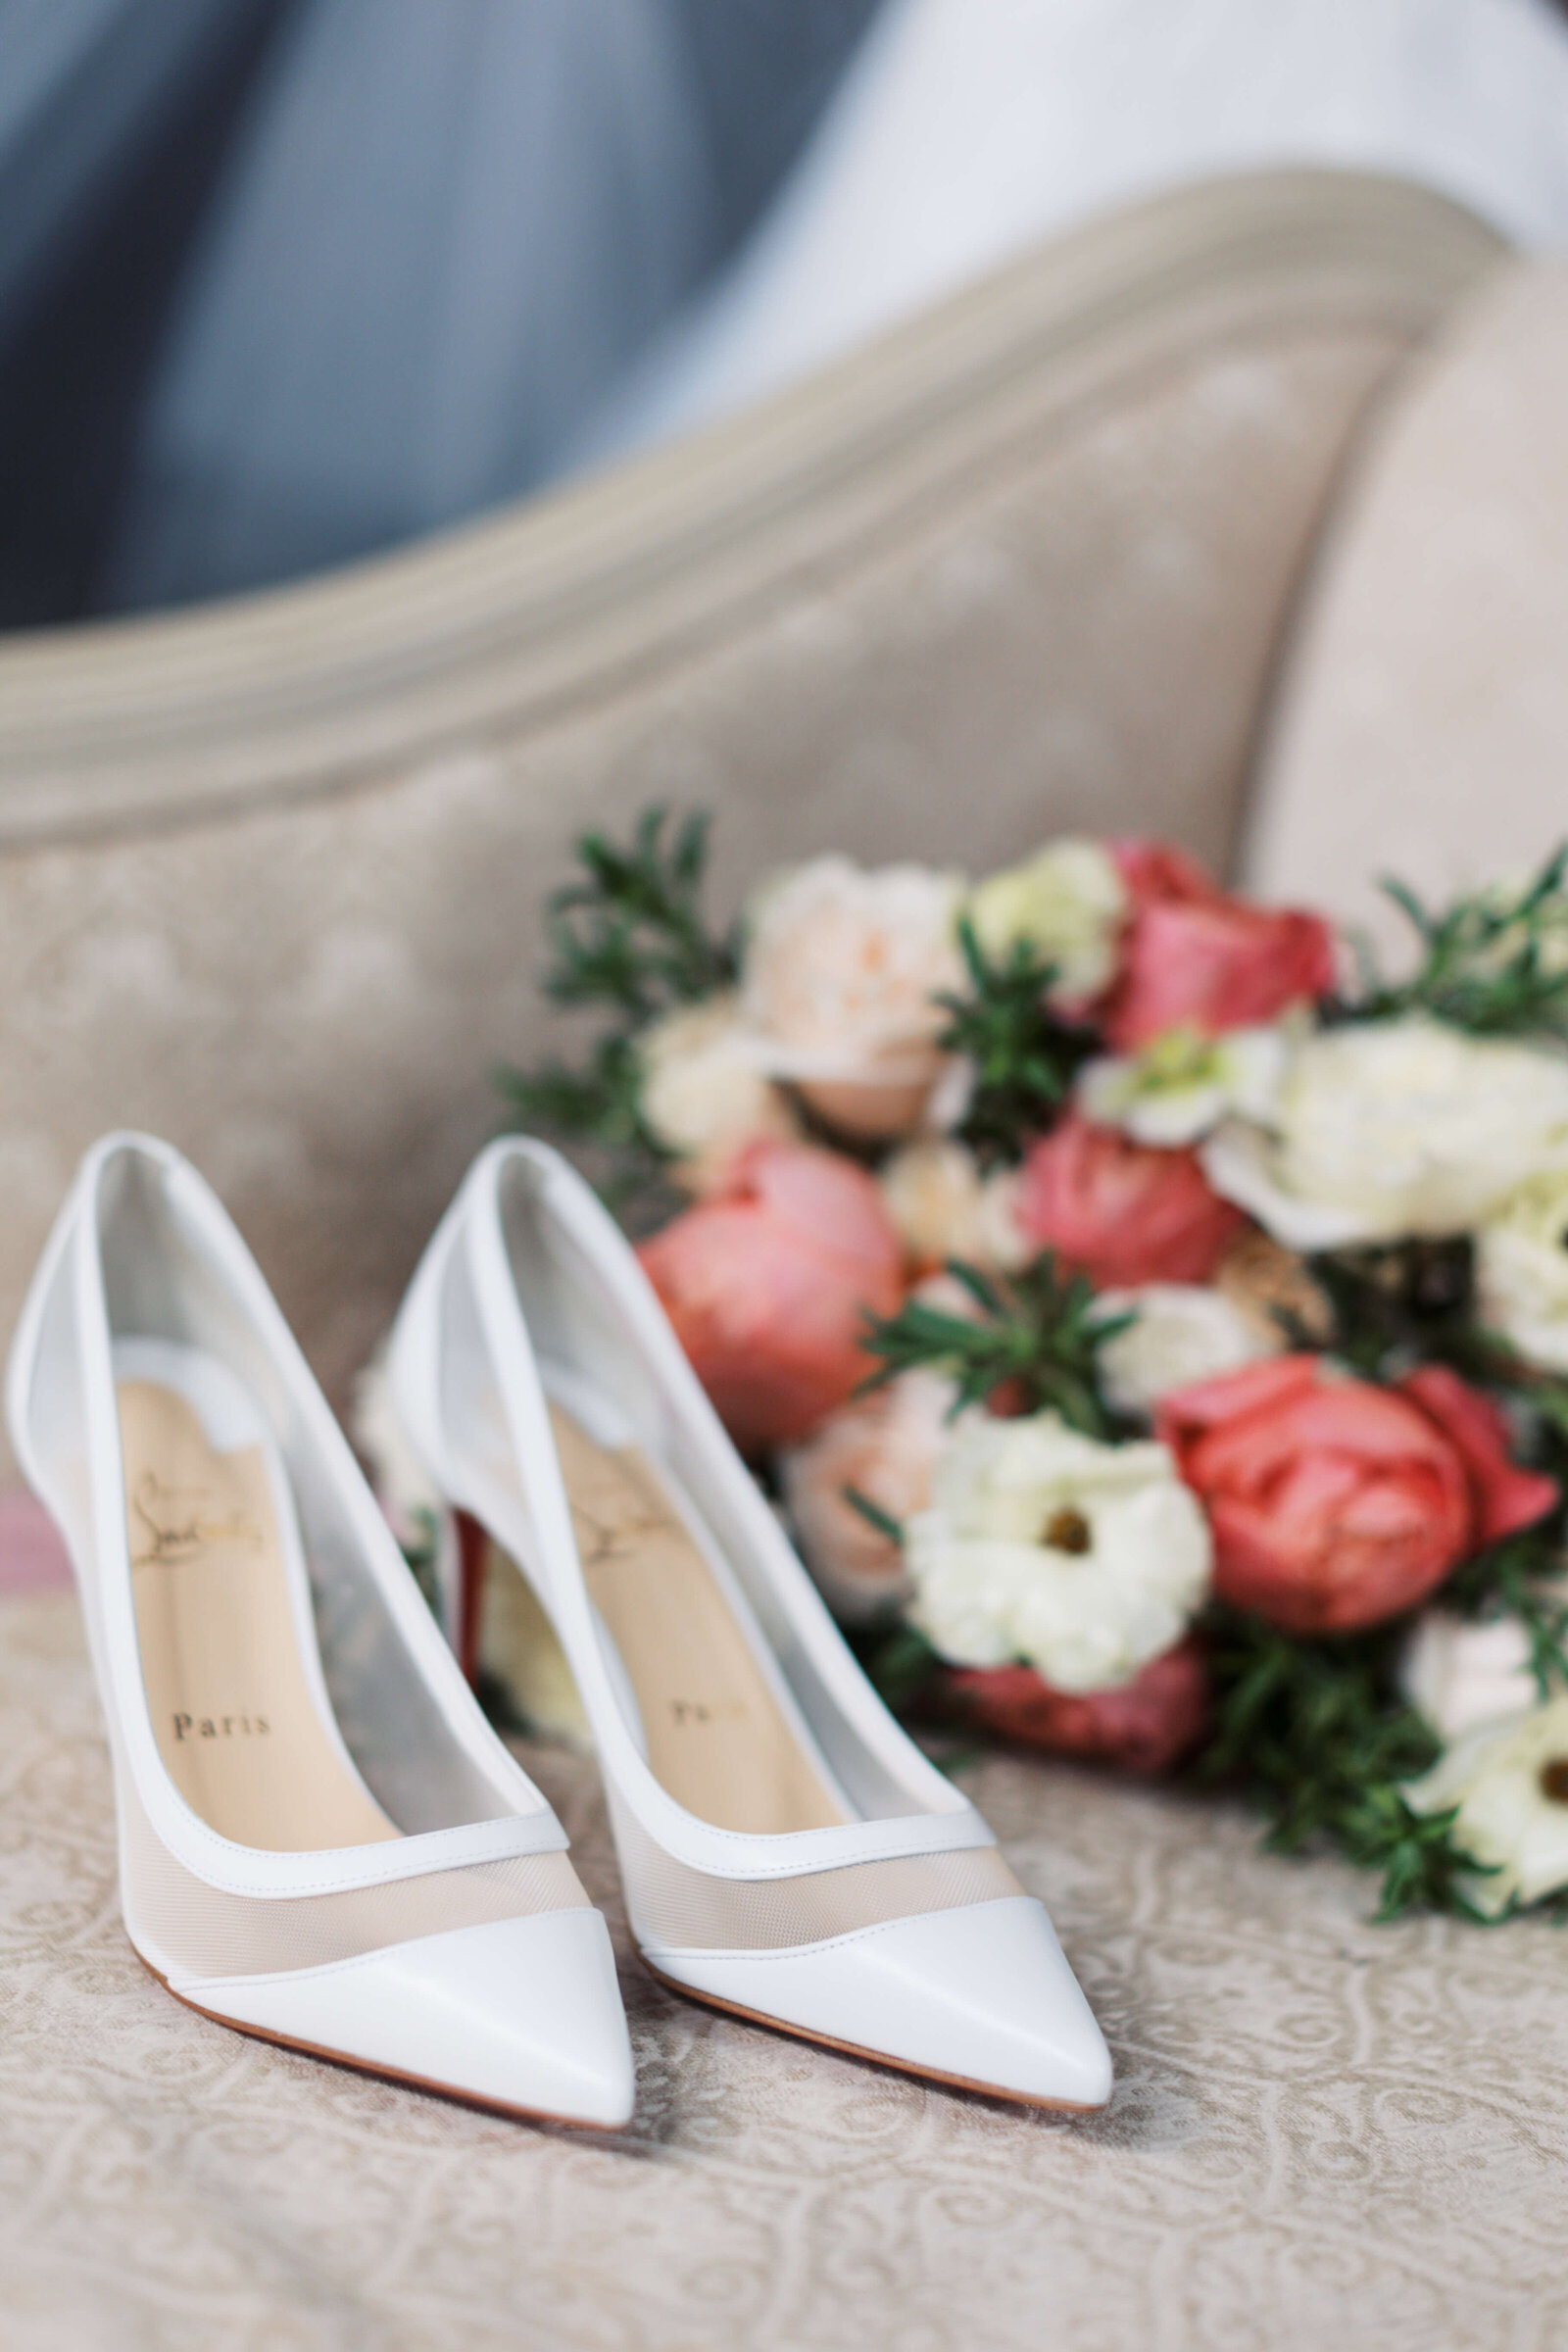 Christian Louboutin bridal shoes and pink bridal bouquet.